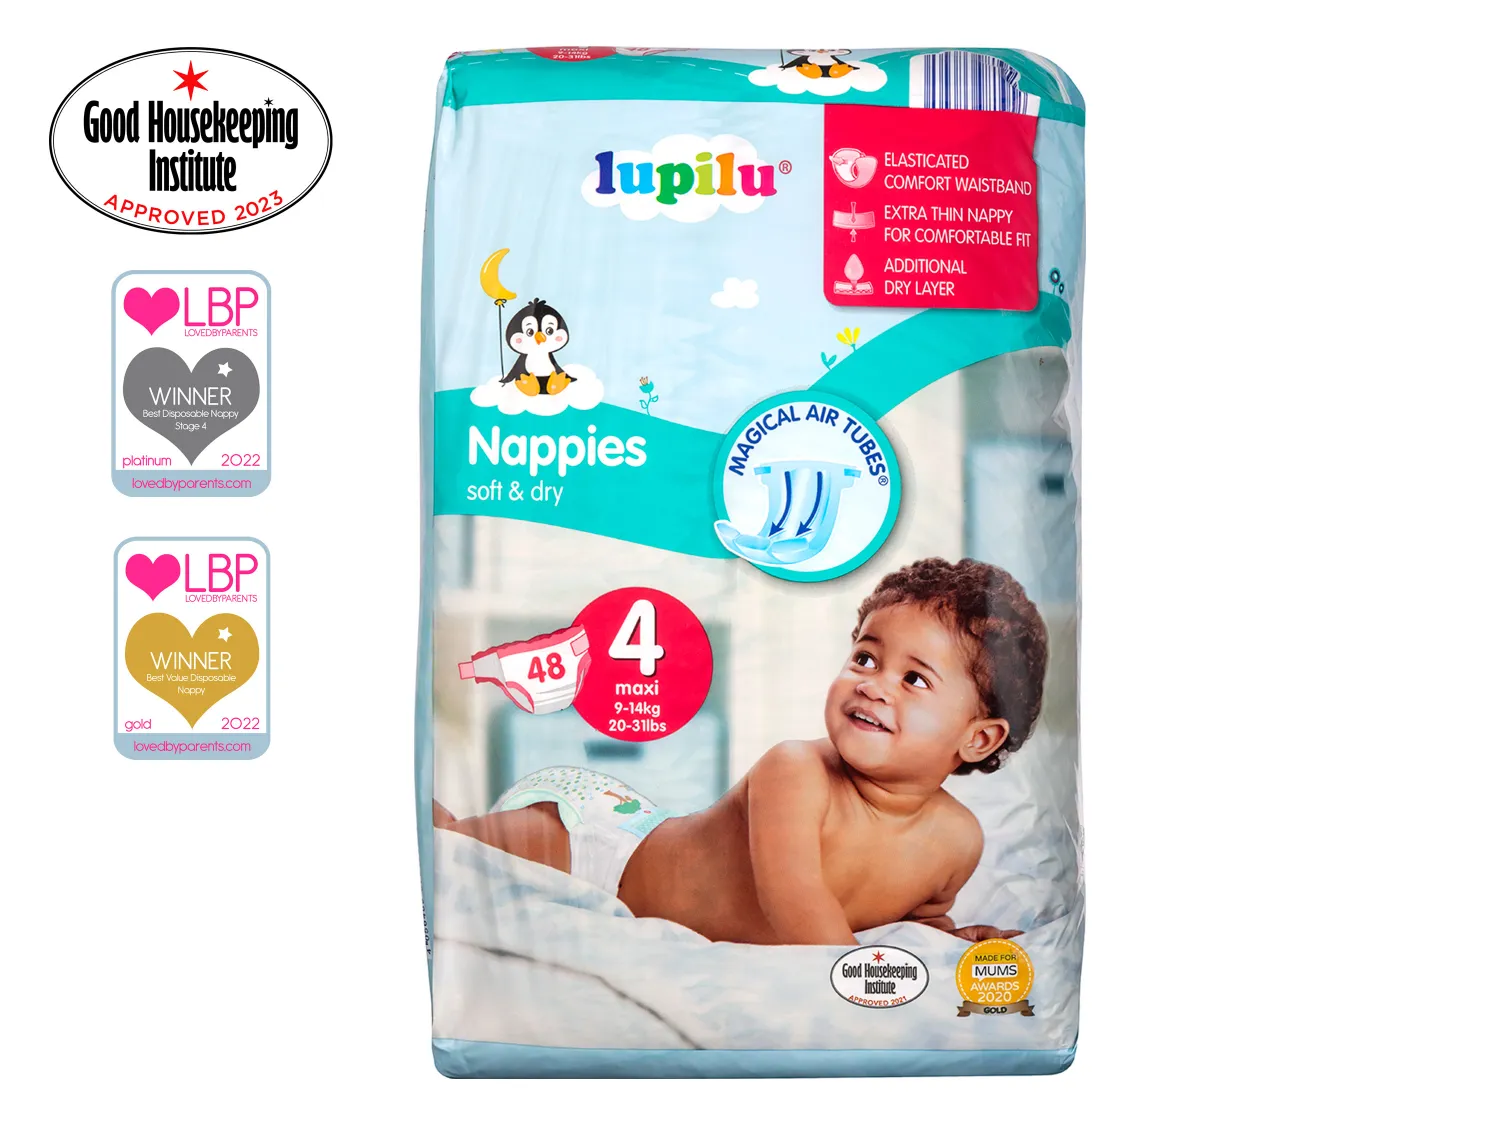 pampersy pampers lidl 4